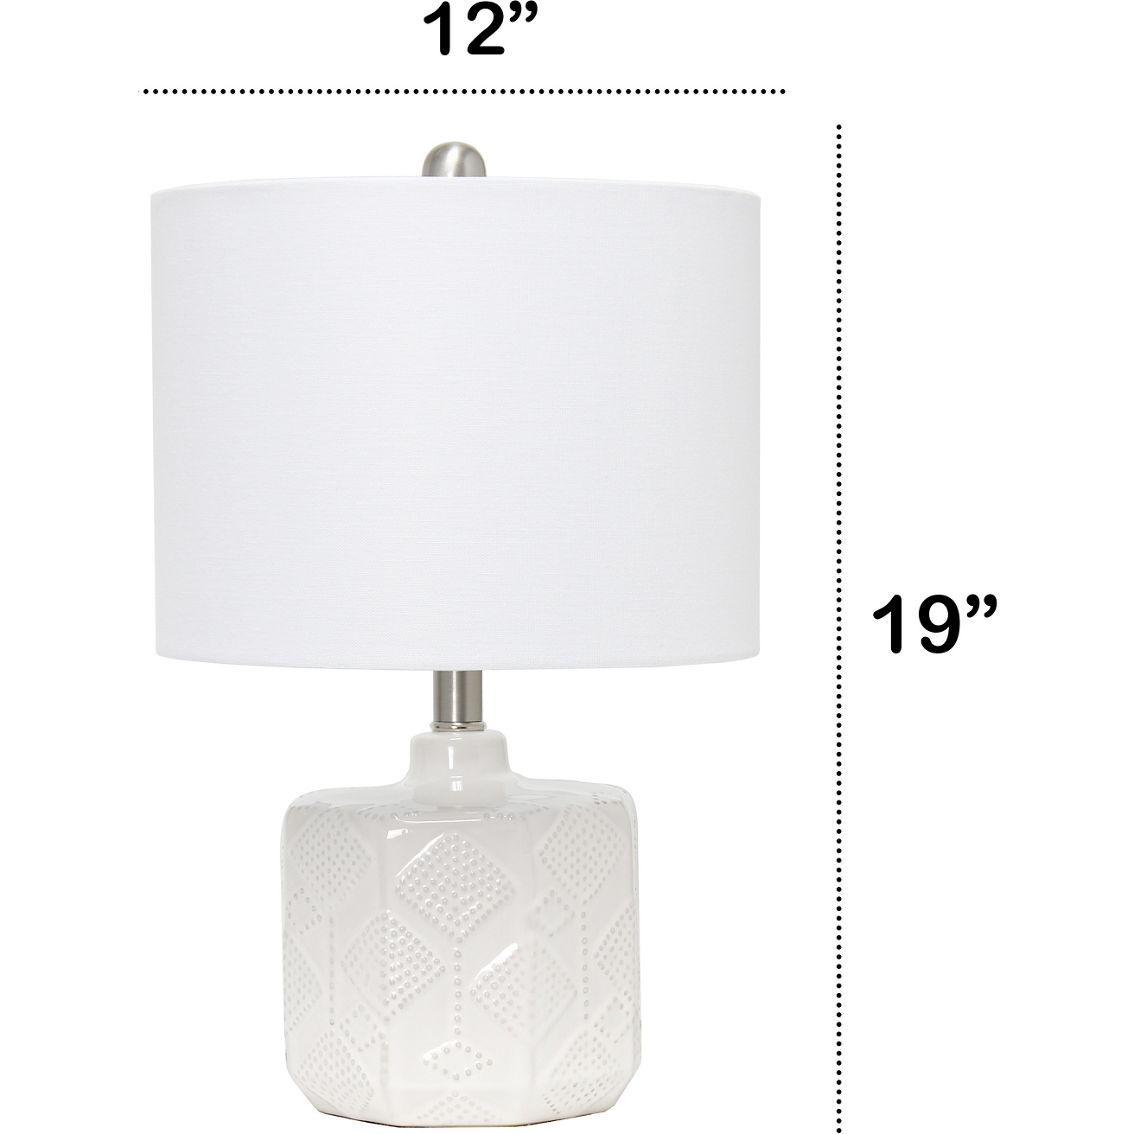 Lalia Home 19 in. Floral Textured Bedside Table Lamp with White Fabric Shade - Image 8 of 8